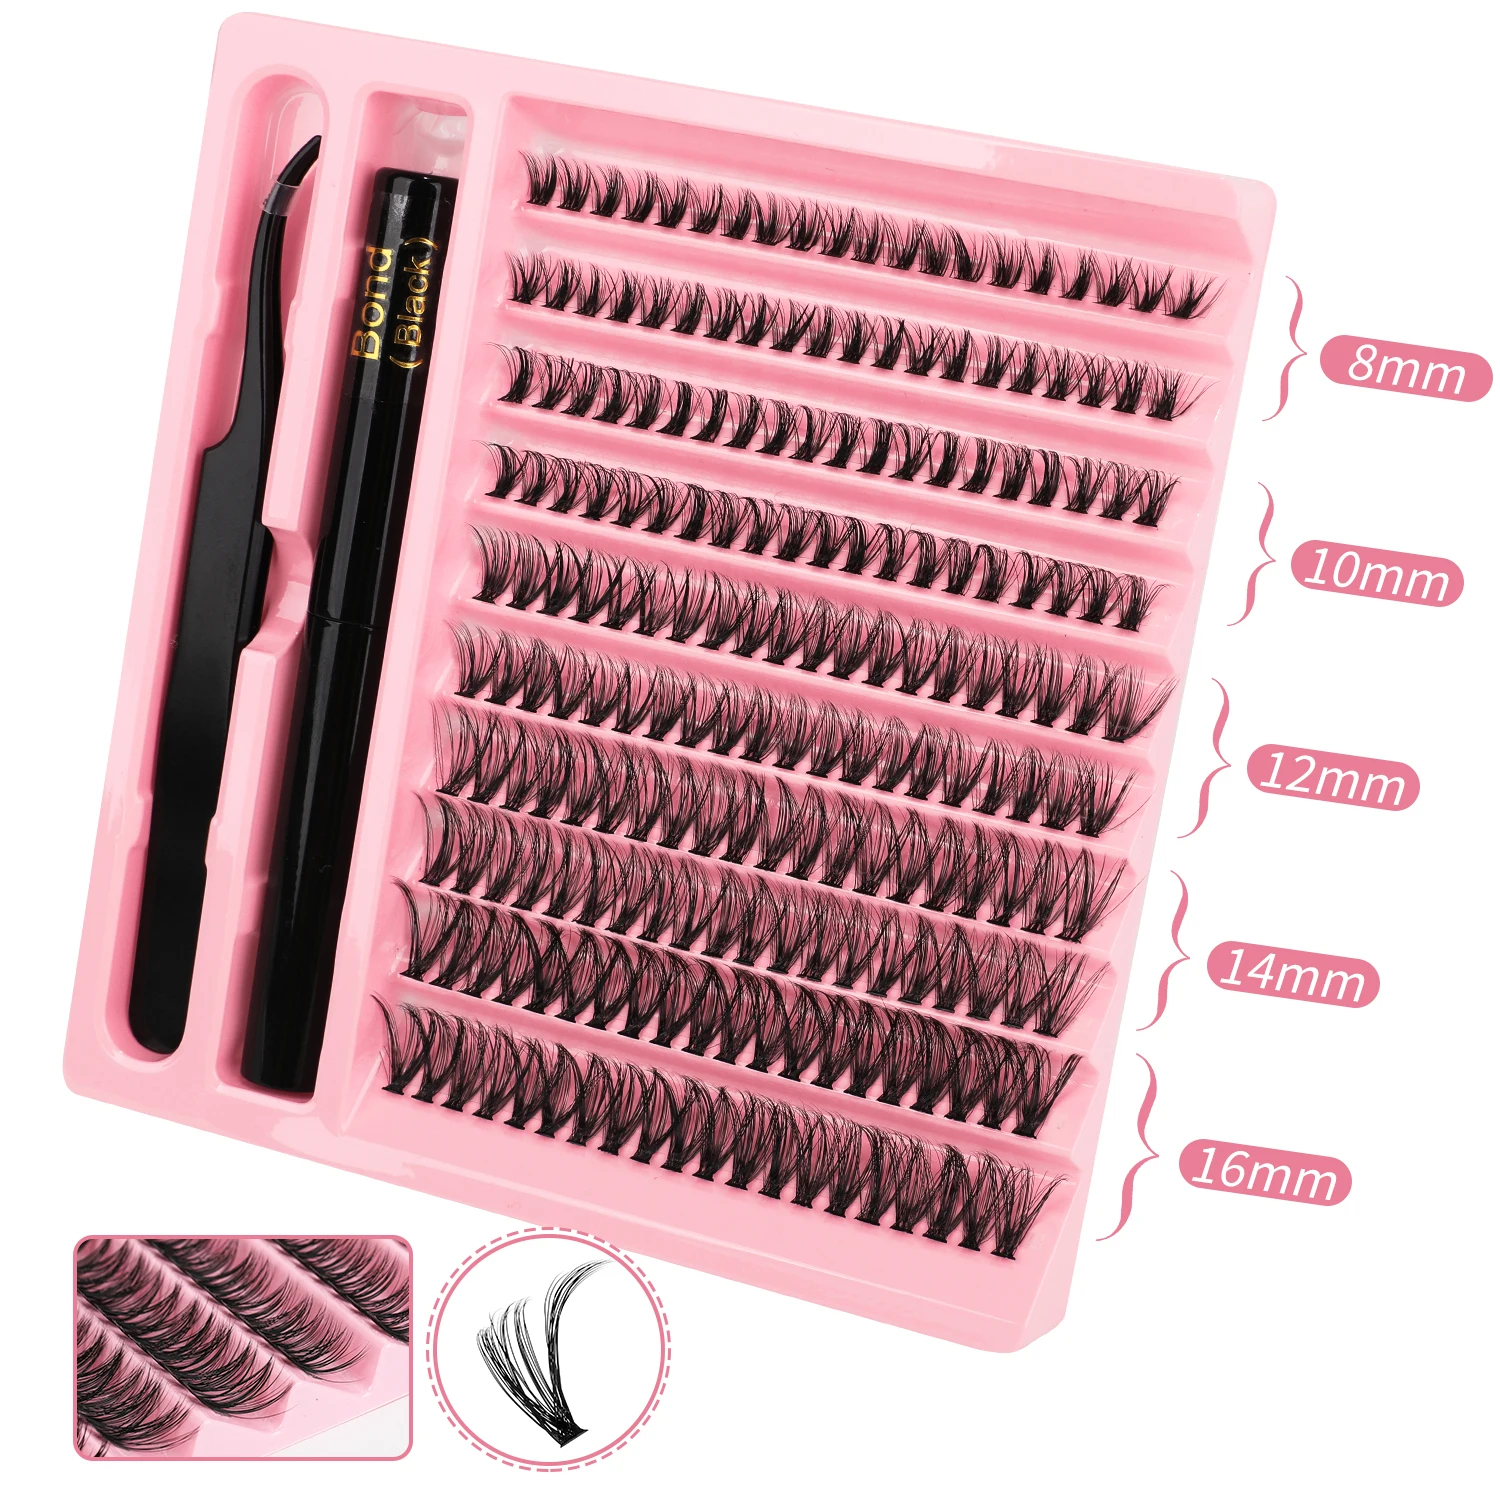 

30D 40D pre cut segment mink curl b glue-based diy individual clusters lash extensions 12-24mm kit at home with soft 280 pcs